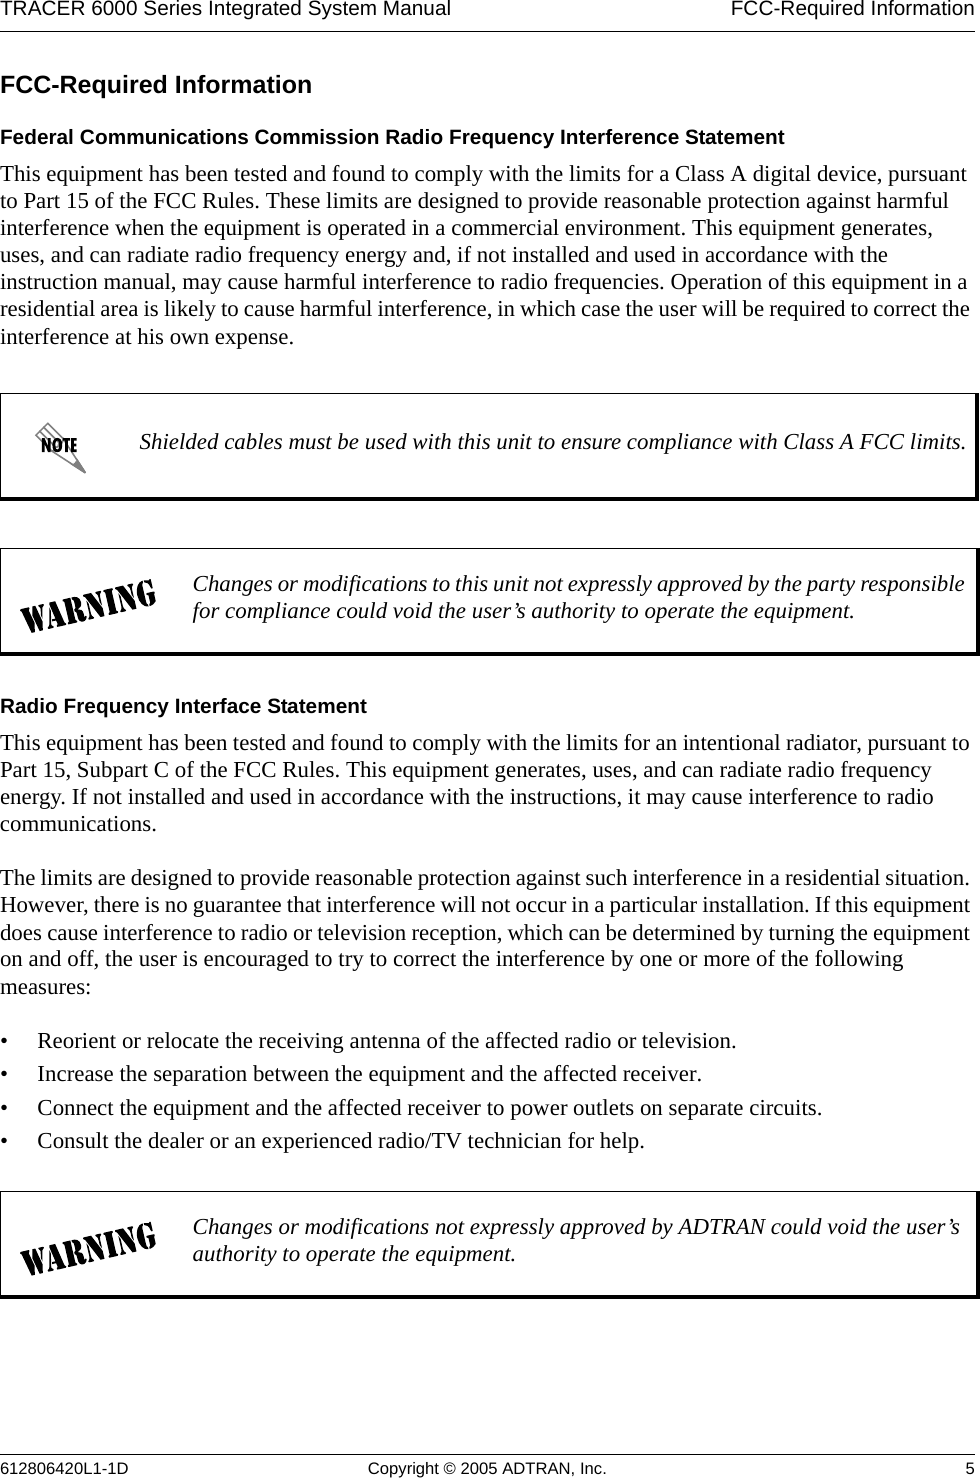 TRACER 6000 Series Integrated System Manual  FCC-Required Information612806420L1-1D Copyright © 2005 ADTRAN, Inc. 5FCC-Required InformationFederal Communications Commission Radio Frequency Interference StatementThis equipment has been tested and found to comply with the limits for a Class A digital device, pursuant to Part 15 of the FCC Rules. These limits are designed to provide reasonable protection against harmful interference when the equipment is operated in a commercial environment. This equipment generates, uses, and can radiate radio frequency energy and, if not installed and used in accordance with the instruction manual, may cause harmful interference to radio frequencies. Operation of this equipment in a residential area is likely to cause harmful interference, in which case the user will be required to correct the interference at his own expense.Radio Frequency Interface StatementThis equipment has been tested and found to comply with the limits for an intentional radiator, pursuant to Part 15, Subpart C of the FCC Rules. This equipment generates, uses, and can radiate radio frequency energy. If not installed and used in accordance with the instructions, it may cause interference to radio communications.The limits are designed to provide reasonable protection against such interference in a residential situation. However, there is no guarantee that interference will not occur in a particular installation. If this equipment does cause interference to radio or television reception, which can be determined by turning the equipment on and off, the user is encouraged to try to correct the interference by one or more of the following measures: • Reorient or relocate the receiving antenna of the affected radio or television.• Increase the separation between the equipment and the affected receiver.• Connect the equipment and the affected receiver to power outlets on separate circuits.• Consult the dealer or an experienced radio/TV technician for help.Shielded cables must be used with this unit to ensure compliance with Class A FCC limits.Changes or modifications to this unit not expressly approved by the party responsible for compliance could void the user’s authority to operate the equipment.Changes or modifications not expressly approved by ADTRAN could void the user’s authority to operate the equipment.